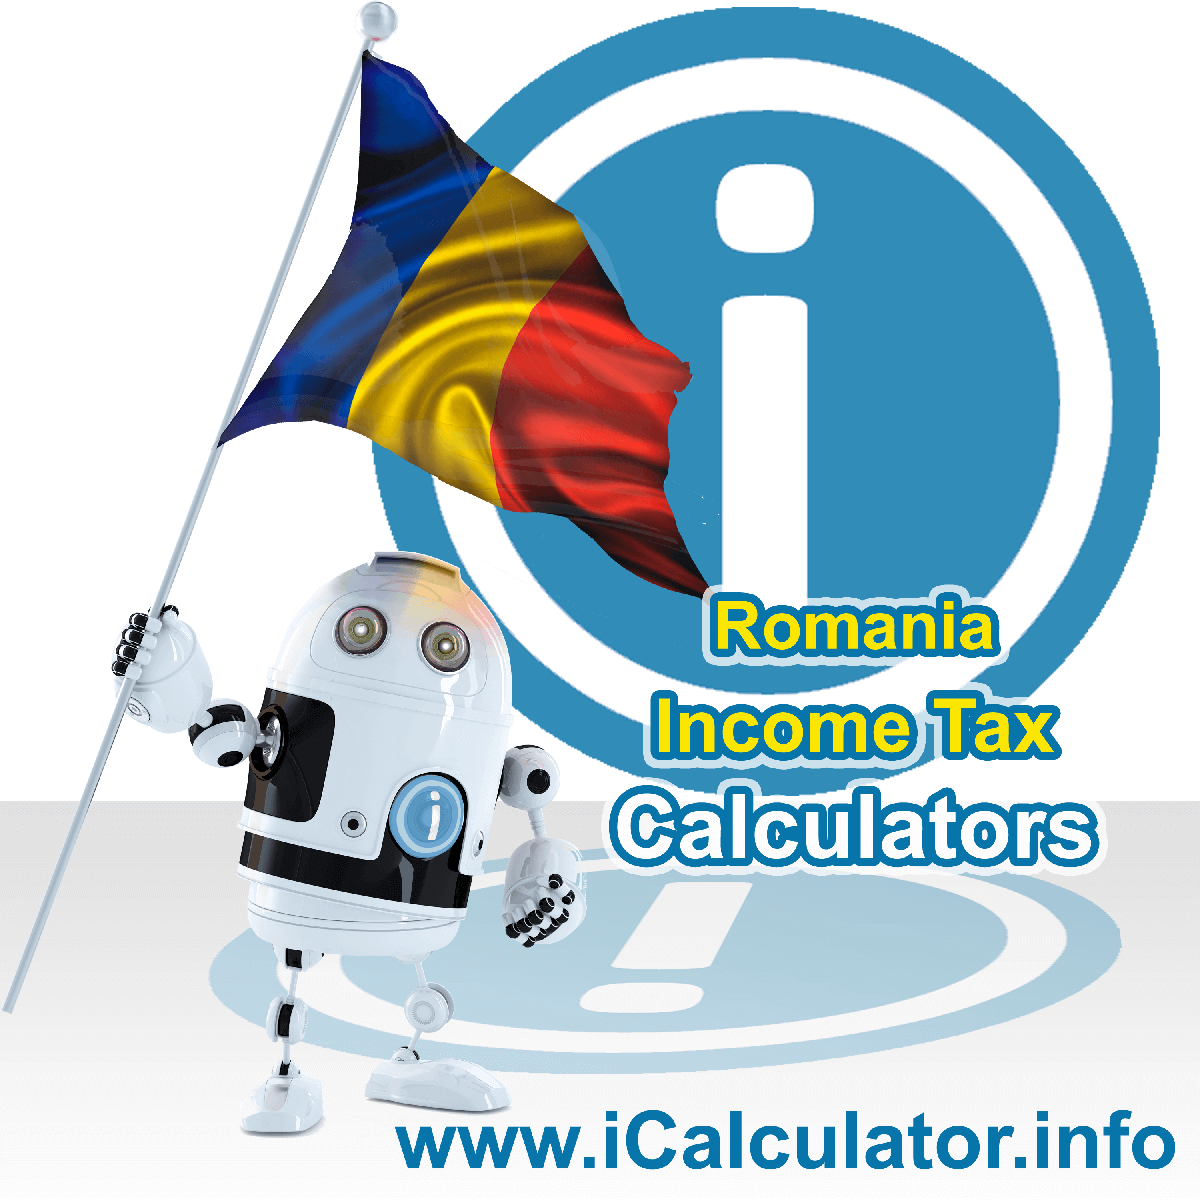 Romania Income Tax Calculator. This image shows a new employer in Romania calculating the annual payroll costs based on multiple payroll payments in one year in Romania using the Romania income tax calculator to understand their payroll costs in Romania in 2023